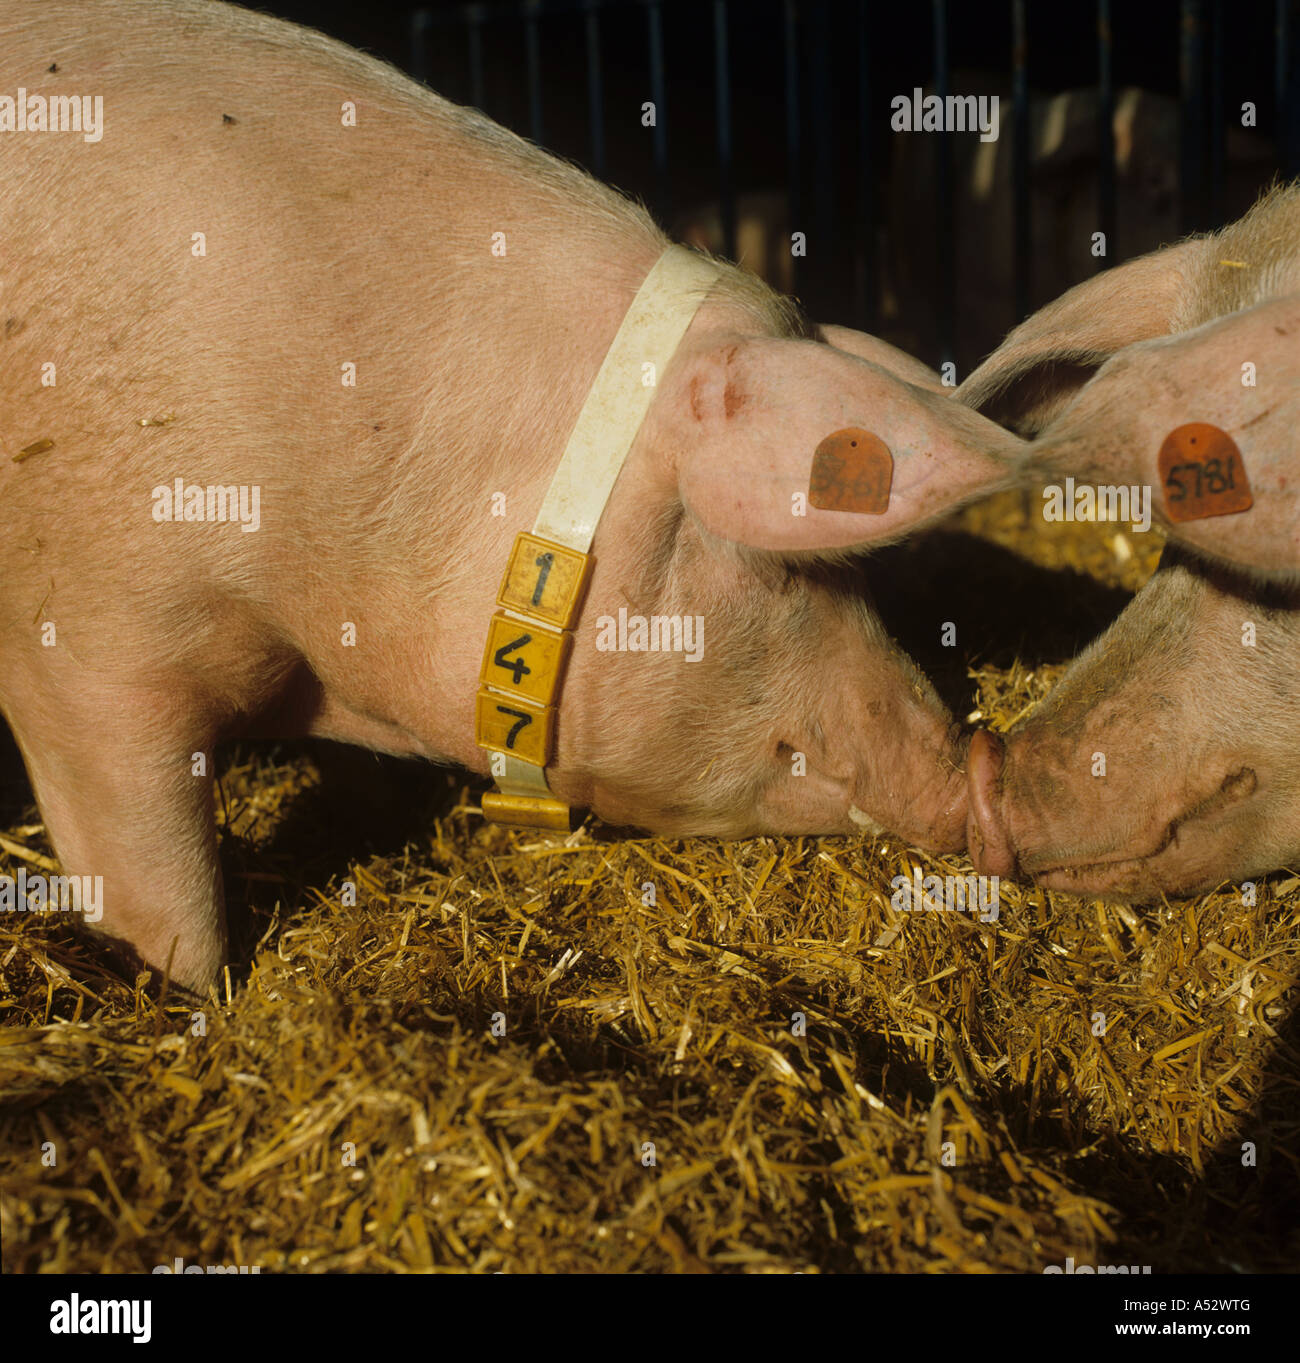 Large white sows head to head with transponder for automatic feeder Stock Photo